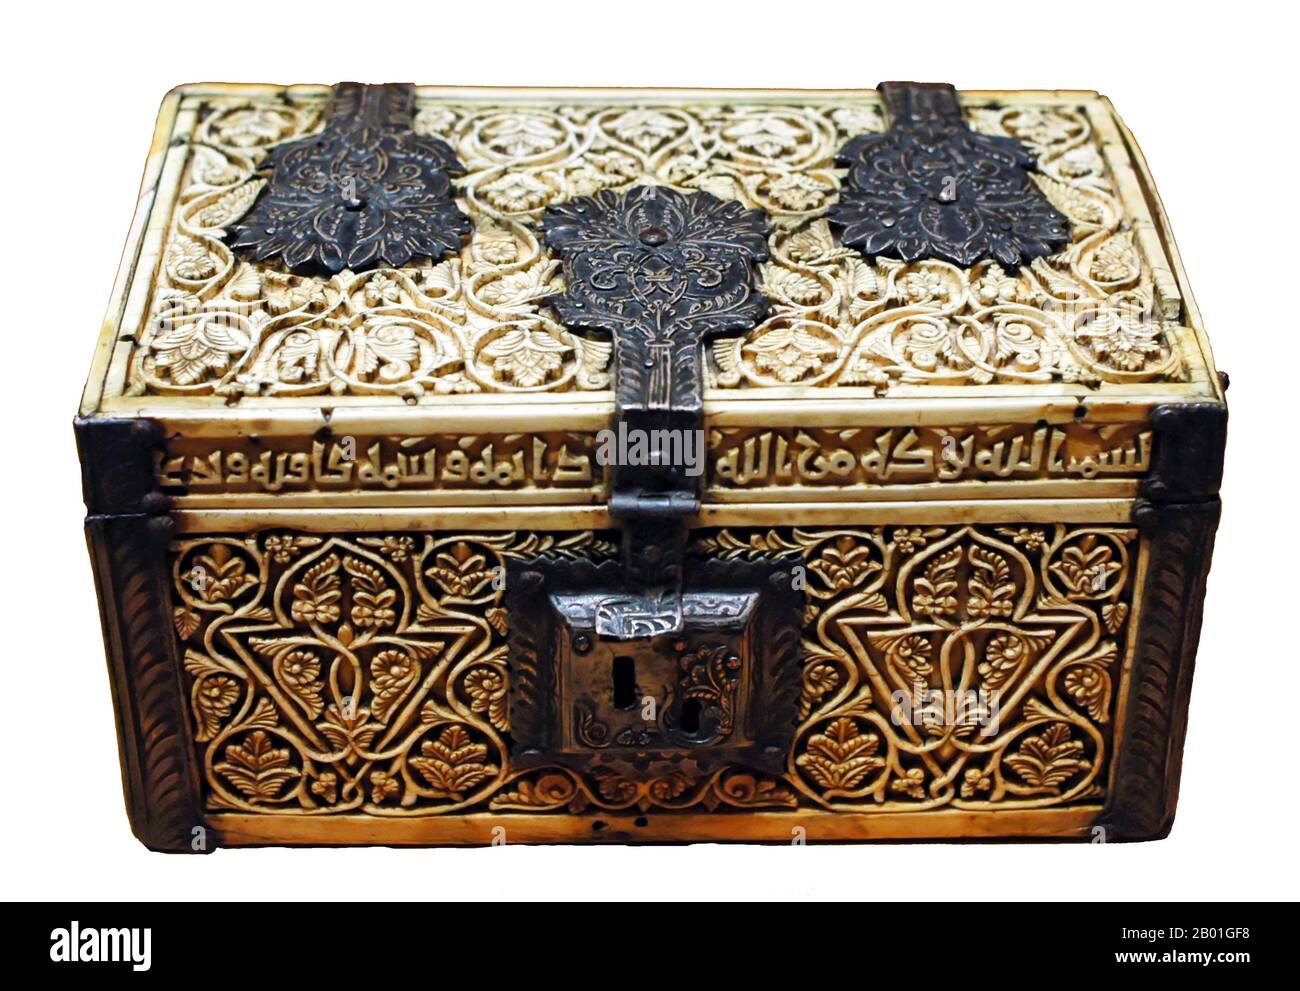 Spain/Al-Andalus: An ivory casket with carved Arabesques, engraved silver and a Kufic inscription. Islamic Spain, Cordoba, 966 CE.  Al-Andalus was the Arabic name given to a nation and territorial region also commonly referred to as Moorish Iberia. The name describes parts of the Iberian Peninsula and Septimania governed by Muslims (often given the generic name of Moors), at various times in the period between 711 and 1492, although the territorial boundaries underwent constant changes due to wars with the Christian Kingdoms. Stock Photo